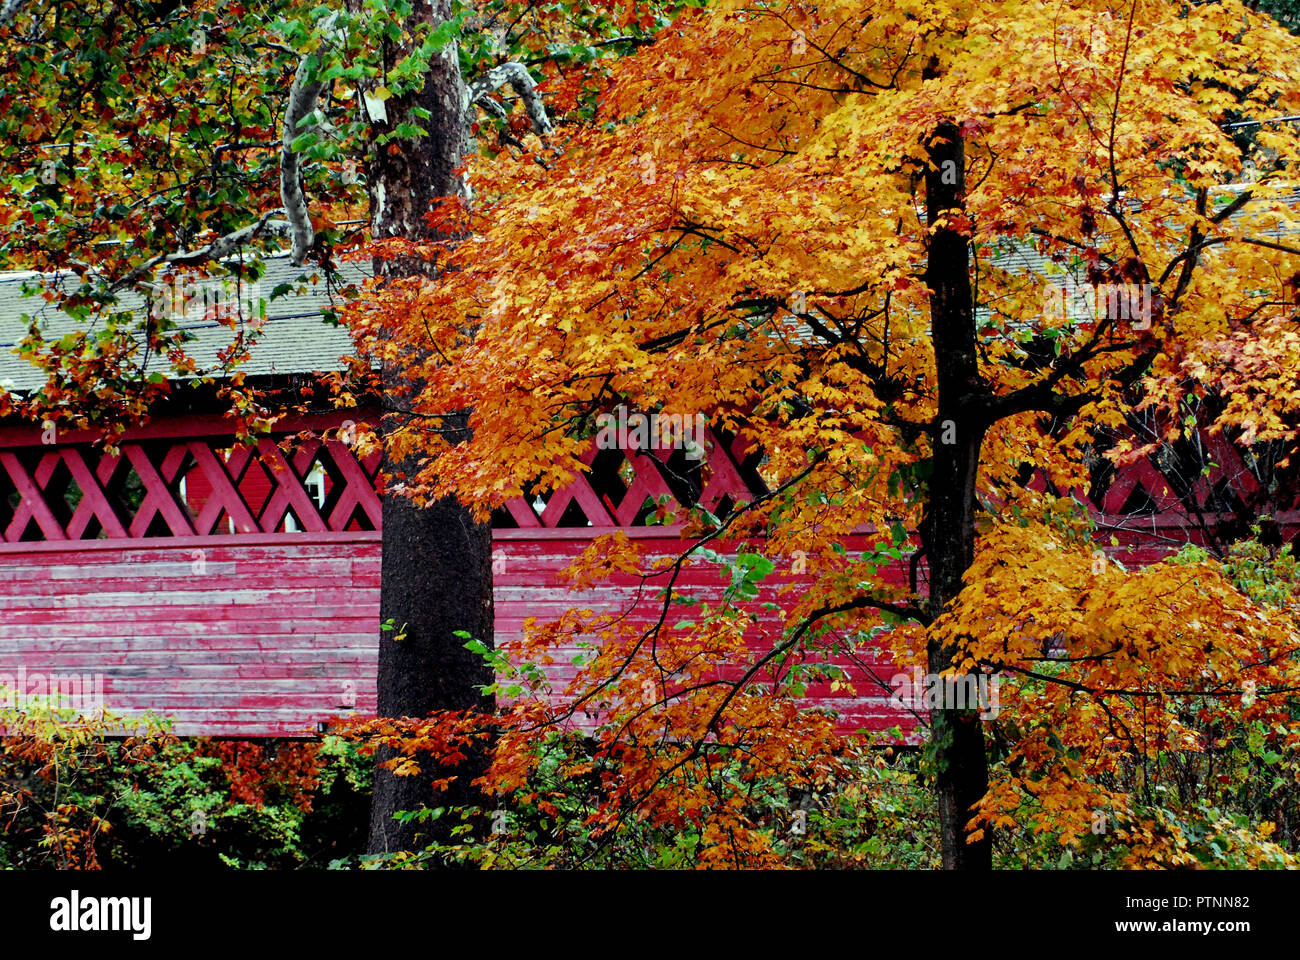 A beautiful scene of Fall colors surrounding the historic Henry covered bridge in Vermont, USA. Stock Photo